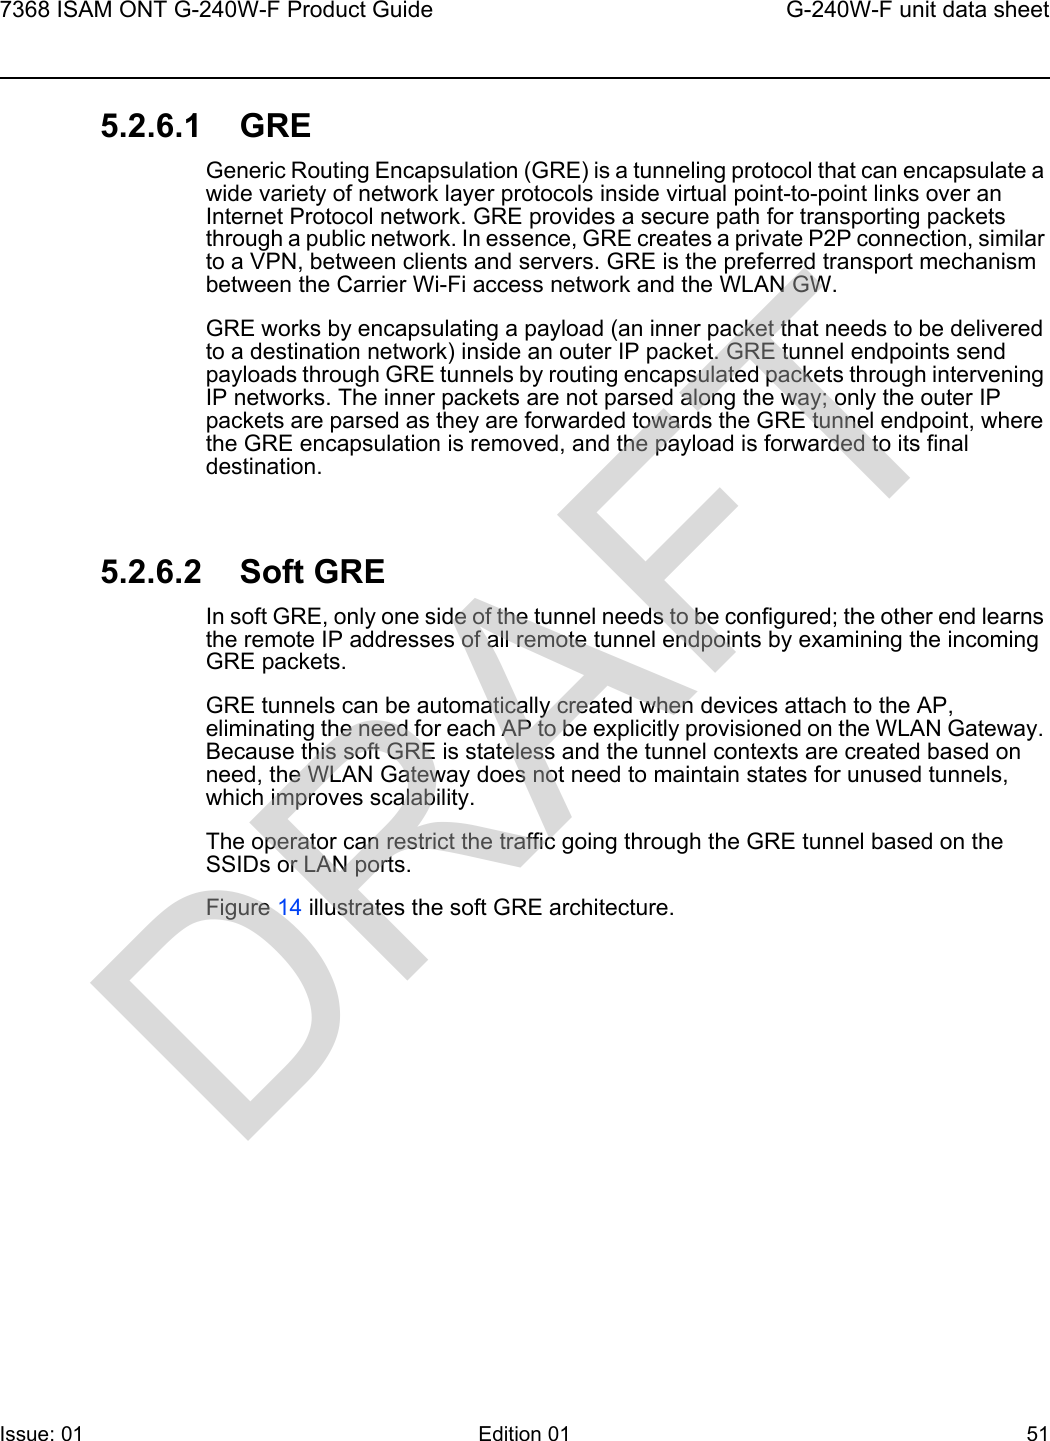 7368 ISAM ONT G-240W-F Product Guide G-240W-F unit data sheetIssue: 01 Edition 01 51 5.2.6.1 GREGeneric Routing Encapsulation (GRE) is a tunneling protocol that can encapsulate a wide variety of network layer protocols inside virtual point-to-point links over an Internet Protocol network. GRE provides a secure path for transporting packets through a public network. In essence, GRE creates a private P2P connection, similar to a VPN, between clients and servers. GRE is the preferred transport mechanism between the Carrier Wi-Fi access network and the WLAN GW.GRE works by encapsulating a payload (an inner packet that needs to be delivered to a destination network) inside an outer IP packet. GRE tunnel endpoints send payloads through GRE tunnels by routing encapsulated packets through intervening IP networks. The inner packets are not parsed along the way; only the outer IP packets are parsed as they are forwarded towards the GRE tunnel endpoint, where the GRE encapsulation is removed, and the payload is forwarded to its final destination.5.2.6.2 Soft GREIn soft GRE, only one side of the tunnel needs to be configured; the other end learns the remote IP addresses of all remote tunnel endpoints by examining the incoming GRE packets. GRE tunnels can be automatically created when devices attach to the AP, eliminating the need for each AP to be explicitly provisioned on the WLAN Gateway. Because this soft GRE is stateless and the tunnel contexts are created based on need, the WLAN Gateway does not need to maintain states for unused tunnels, which improves scalability.The operator can restrict the traffic going through the GRE tunnel based on the SSIDs or LAN ports.Figure 14 illustrates the soft GRE architecture.DRAFT